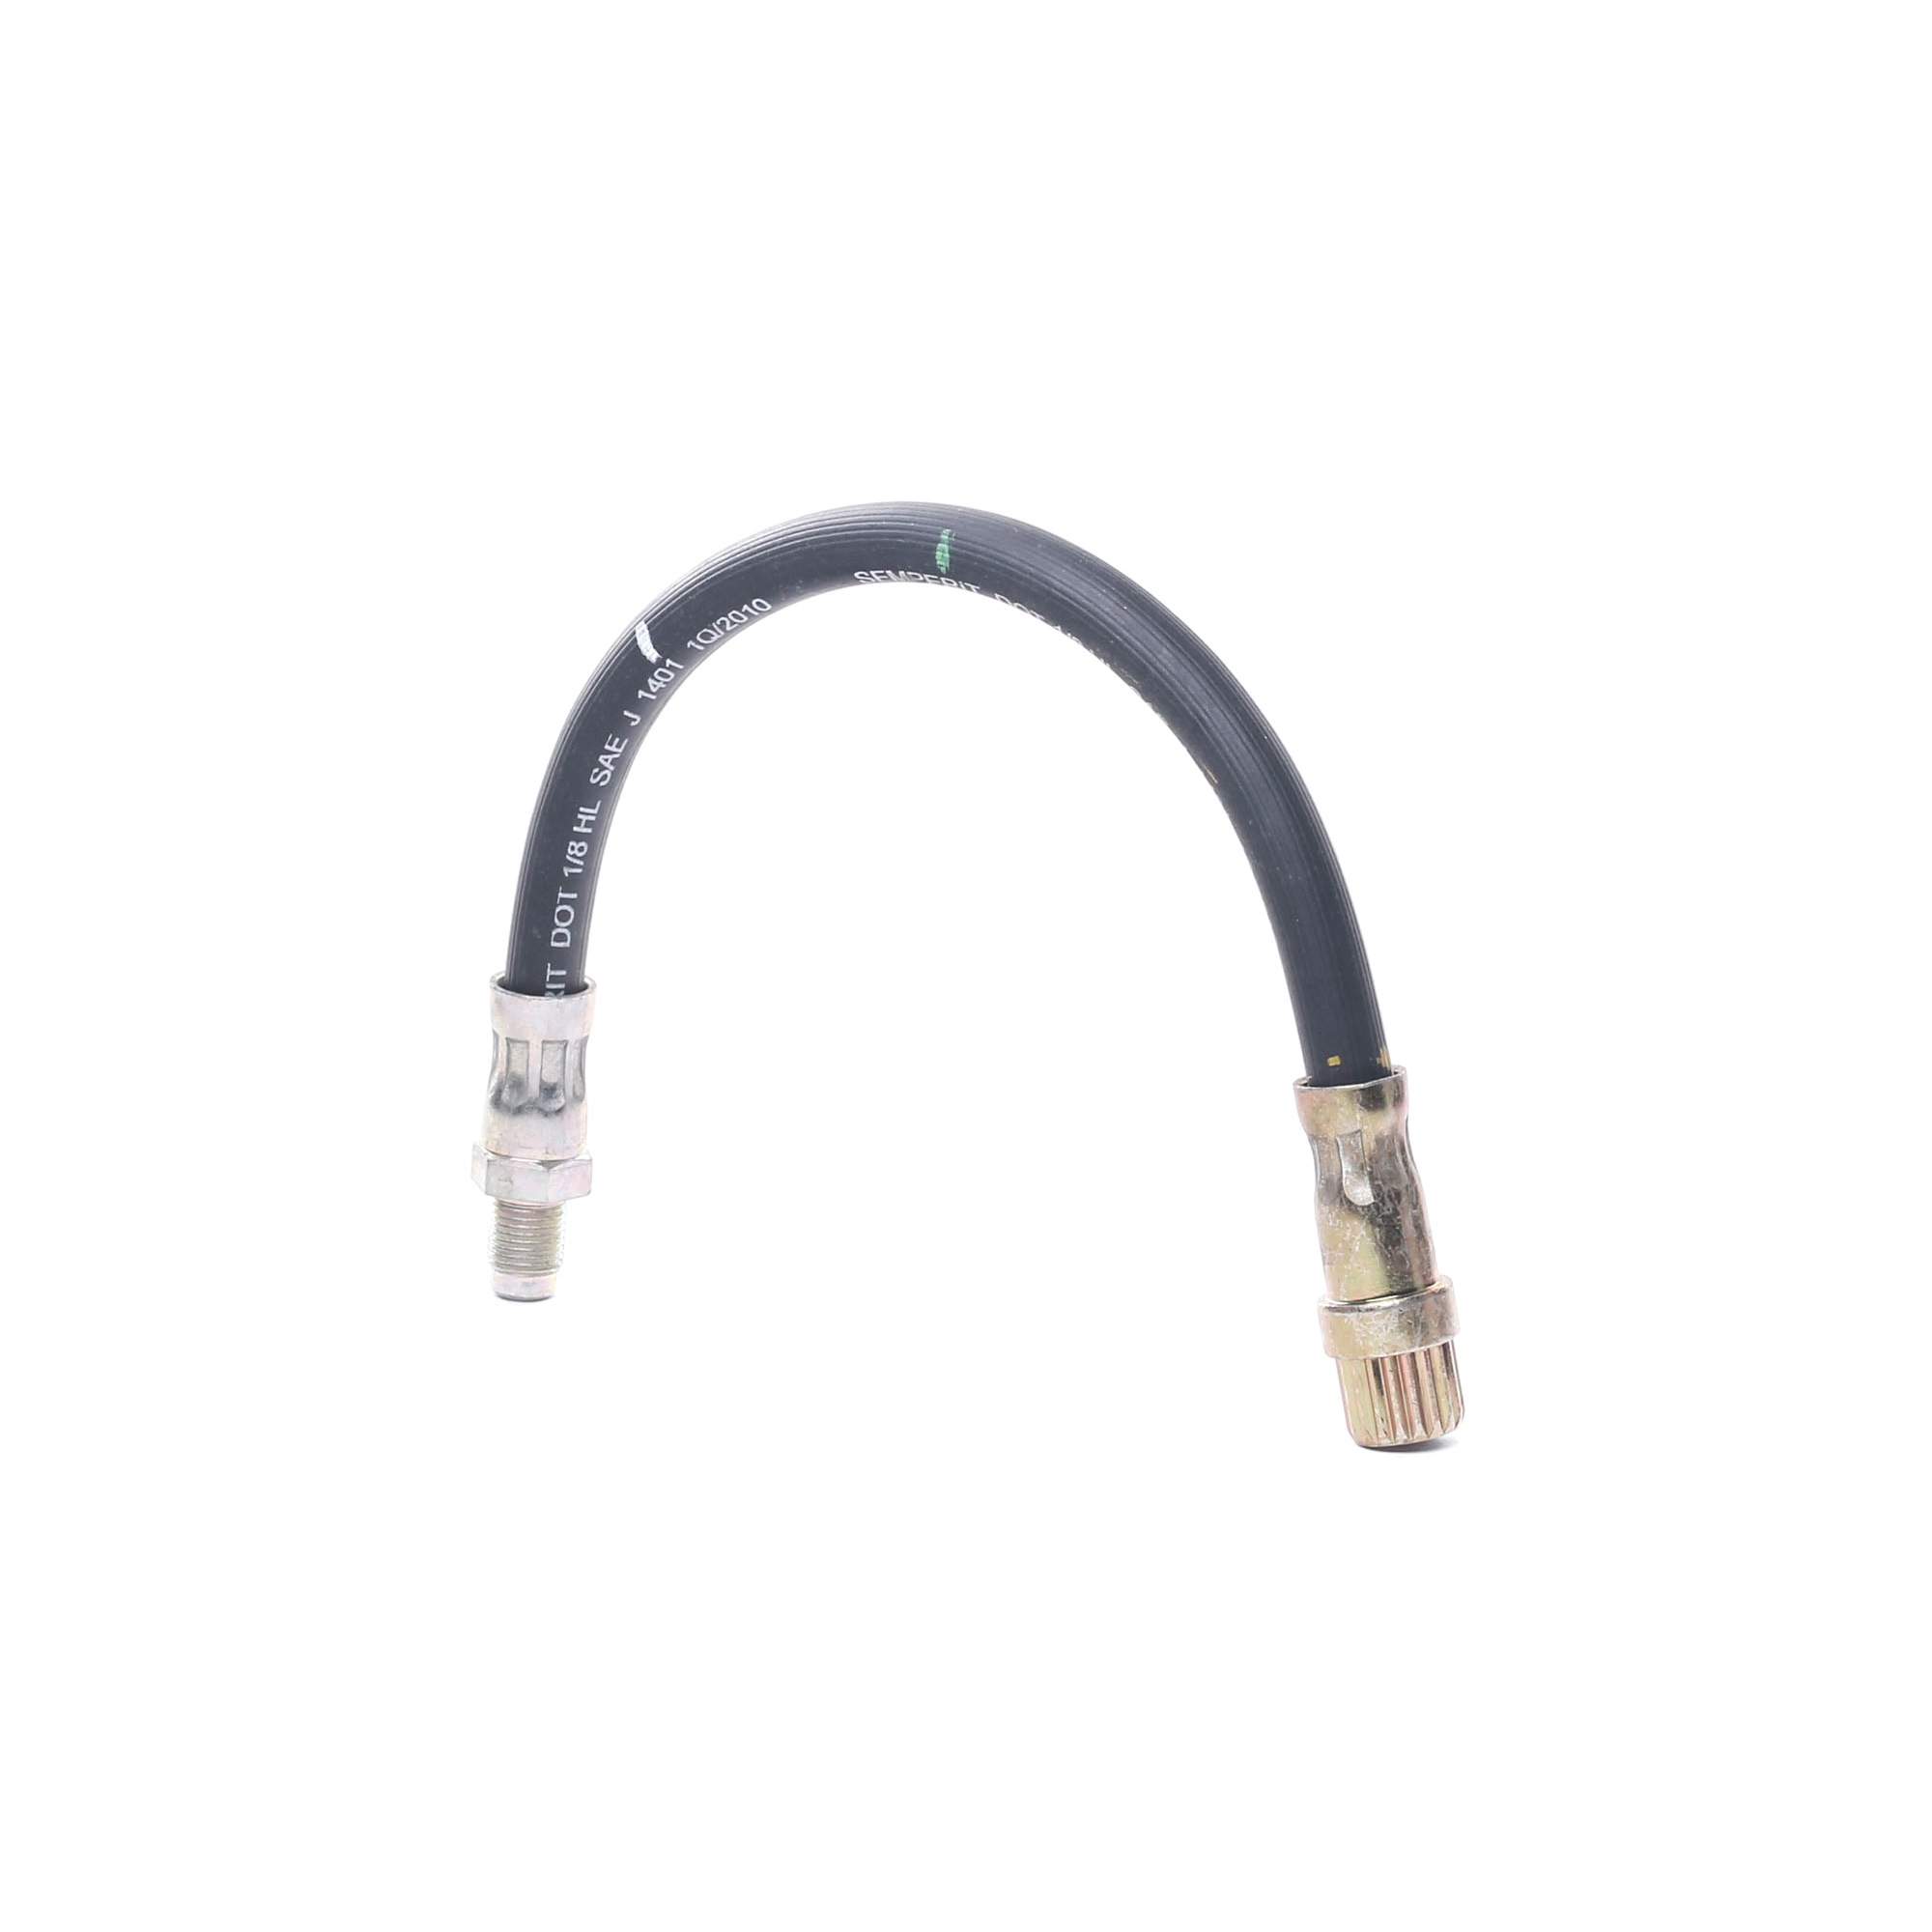 Brake hose BREMBO T 68 018 - Renault TWINGO Pipes and hoses spare parts order